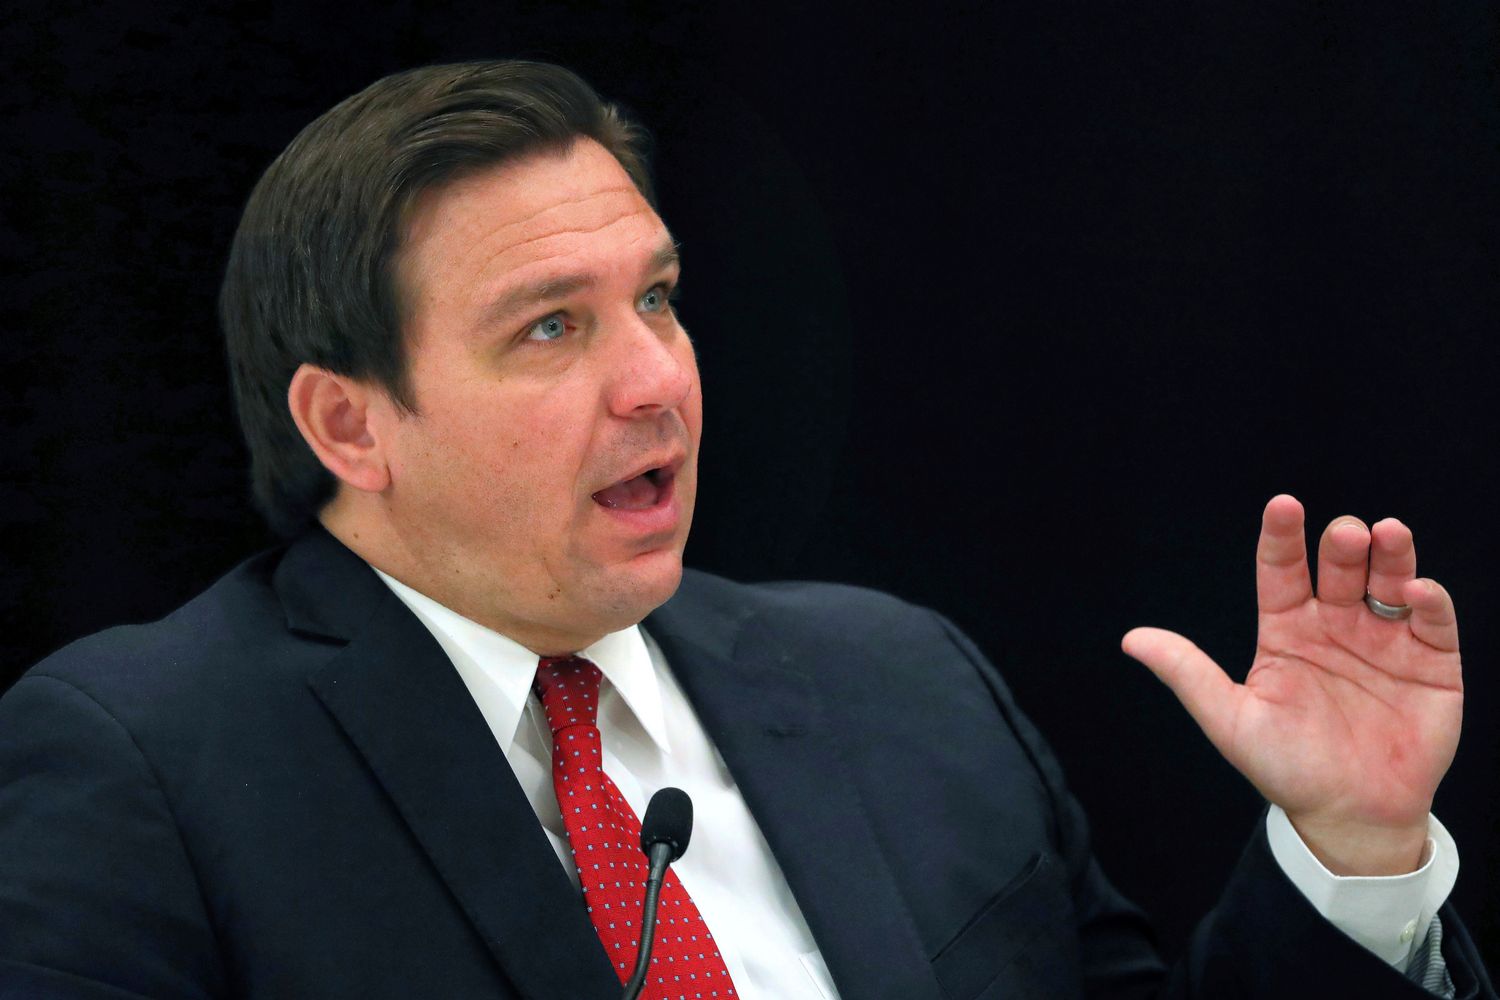 DeSantis loses court pick amid claims of 'racial tokenism'